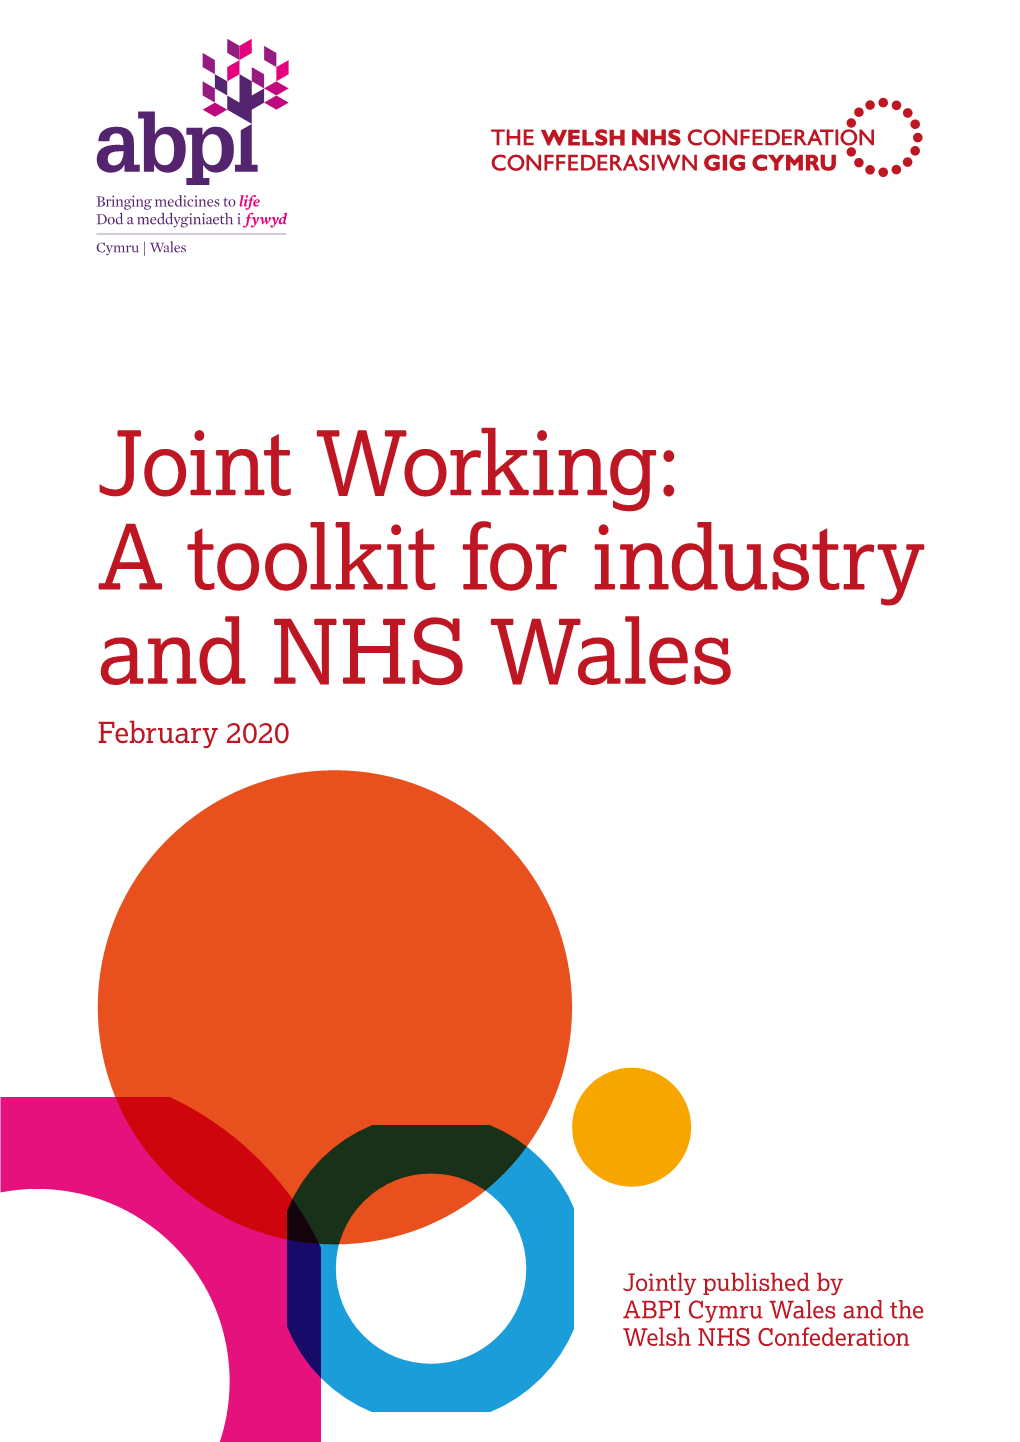 Joint Working: a Toolkit for Industry and NHS Wales February 2020